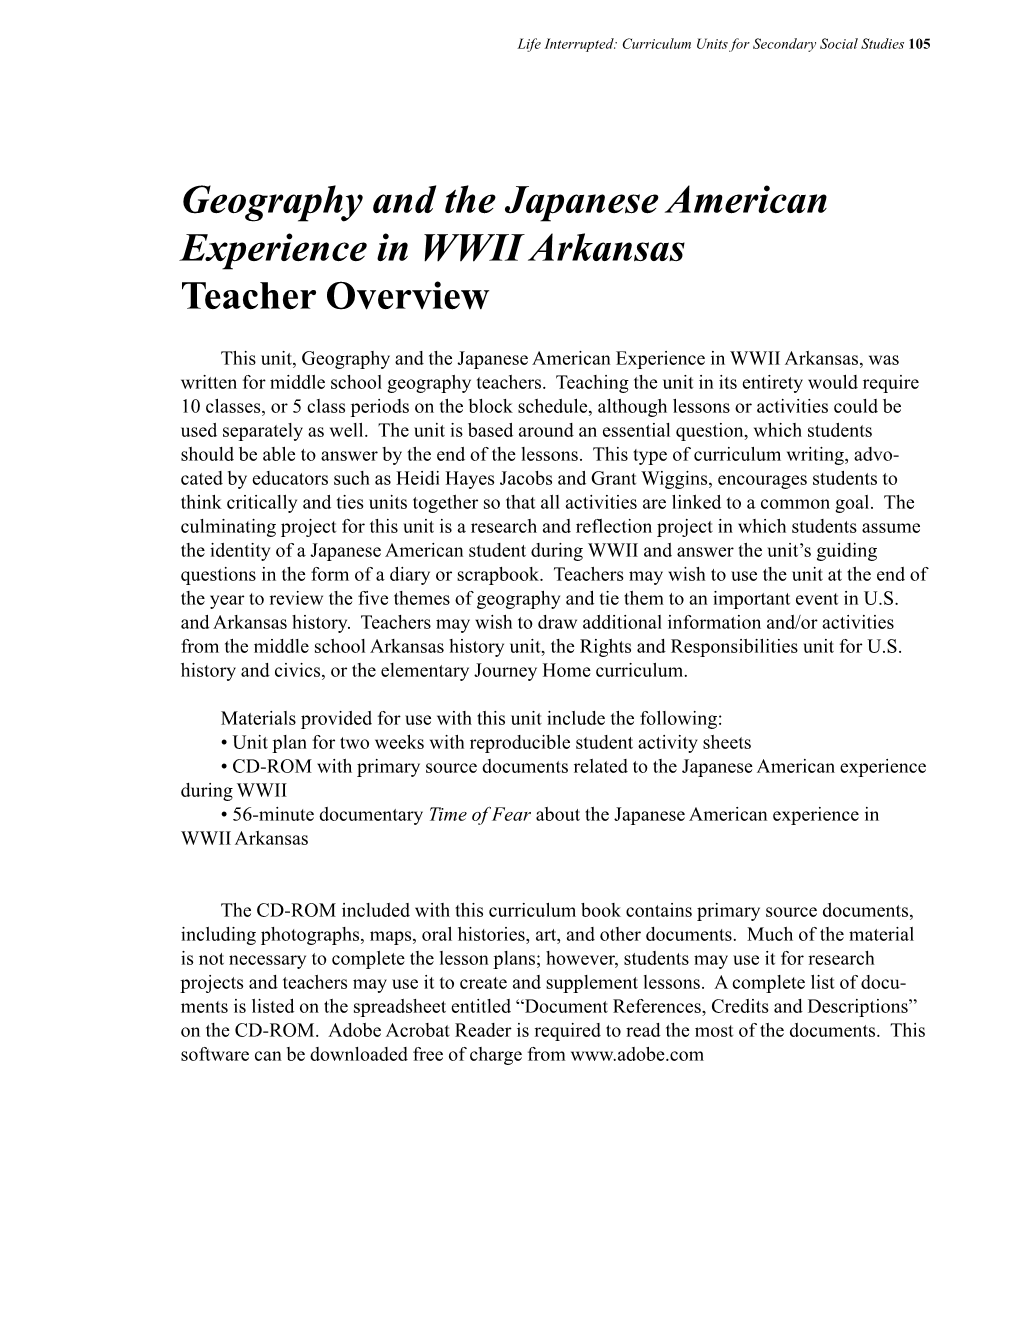 Download the Entire Geography Curriculum (PDF)